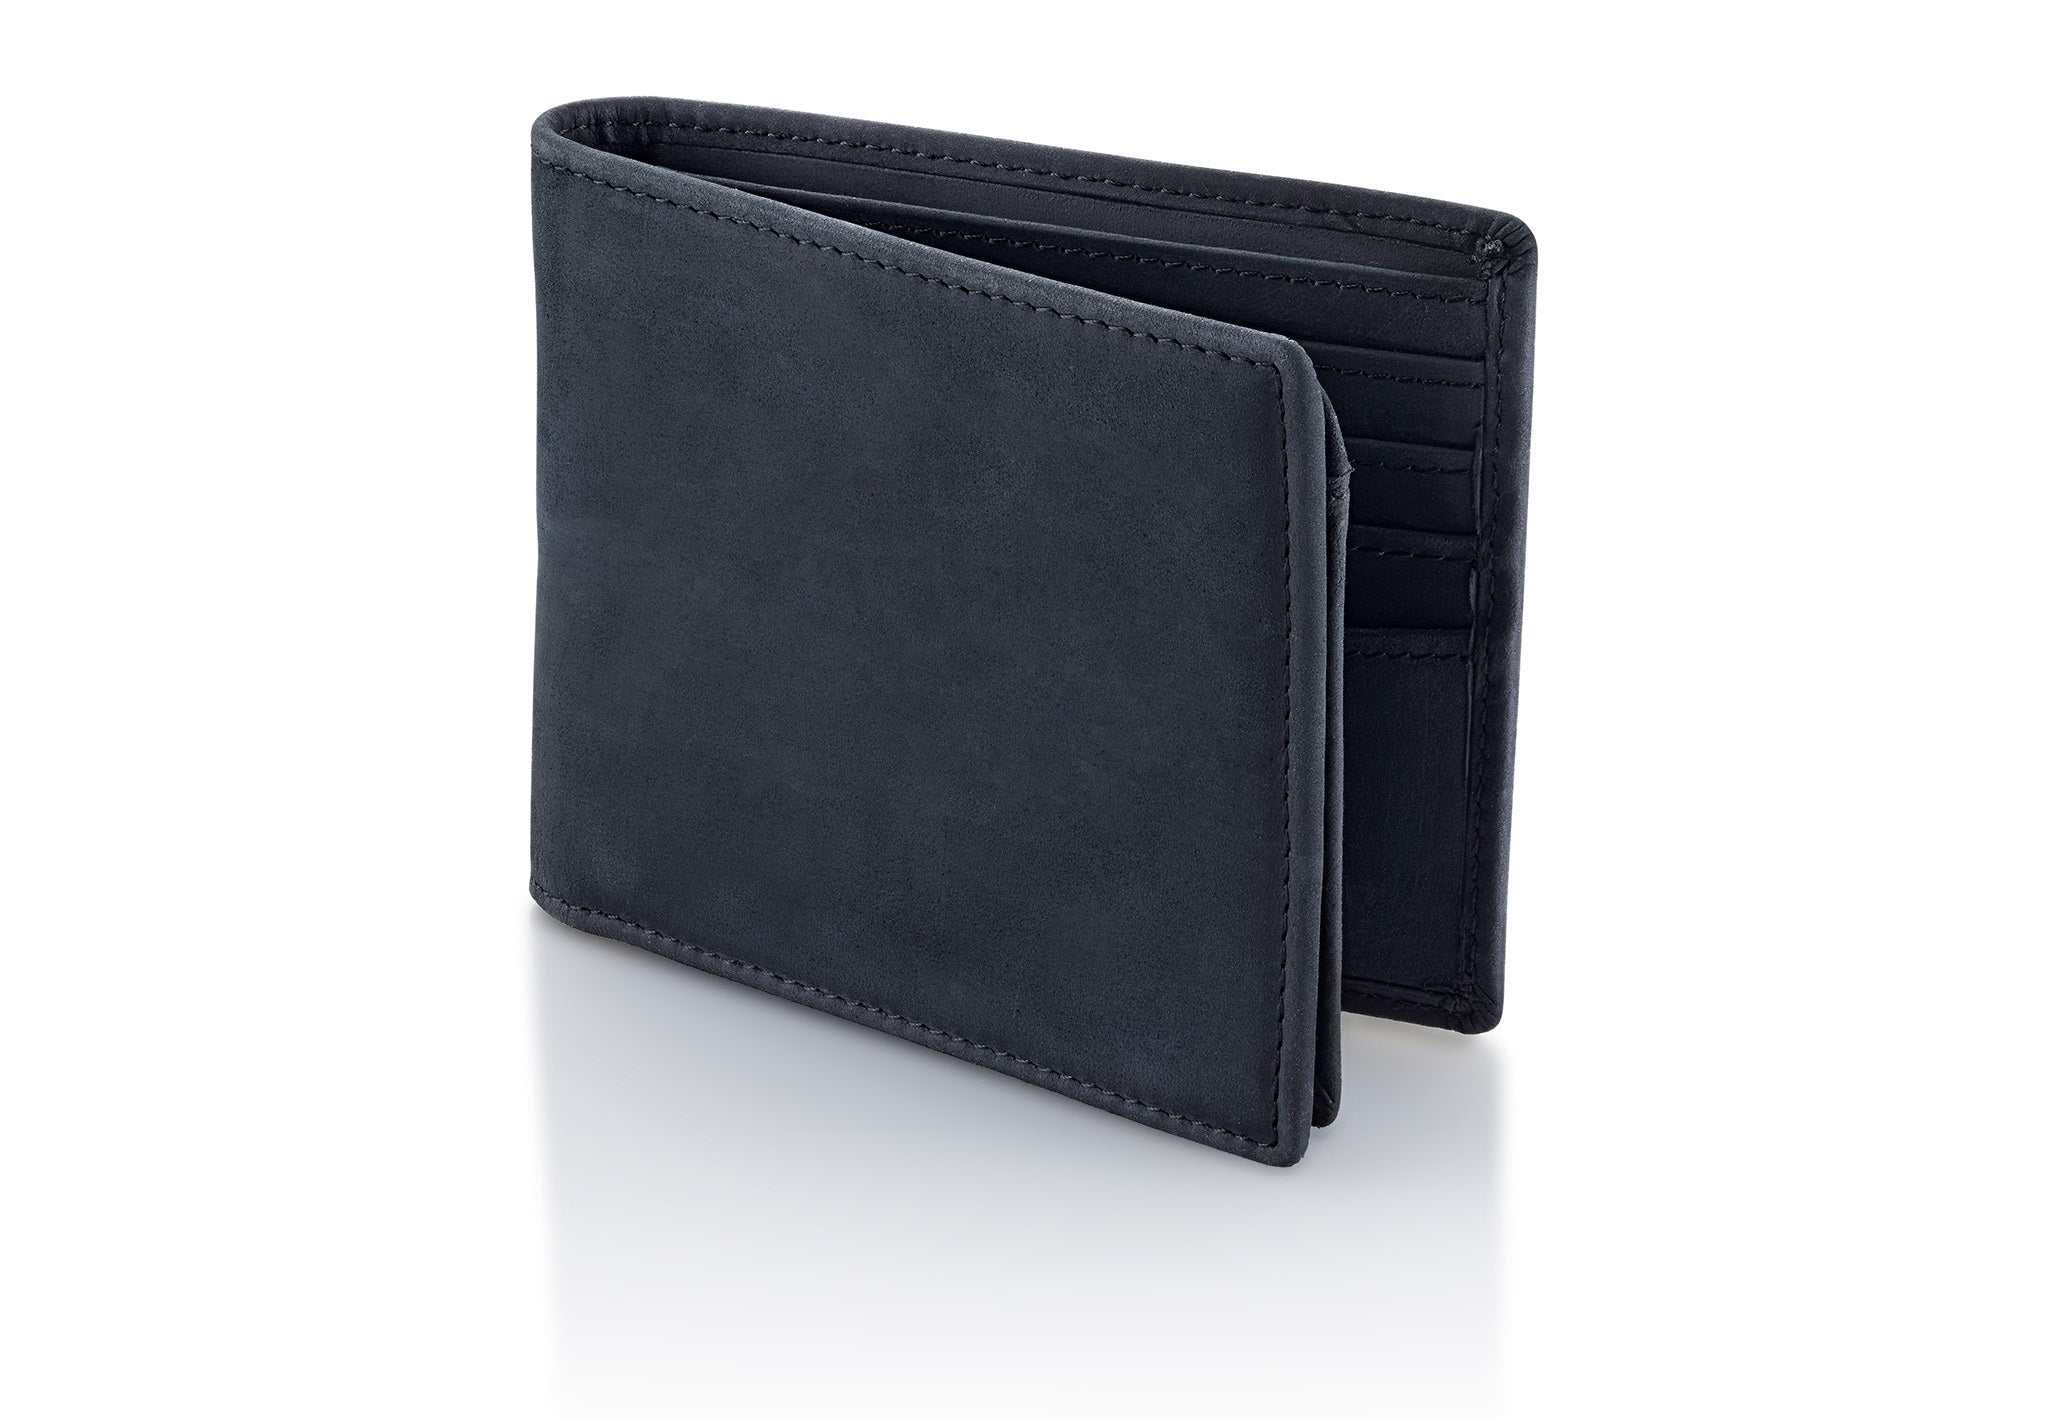 VISOUL Mens Bifold Wallet with 2 ID Windows and 2 Money Compartments,  Genuine Leather Designer Wallet with RFID Blocking for Men Two Tone (Black  and